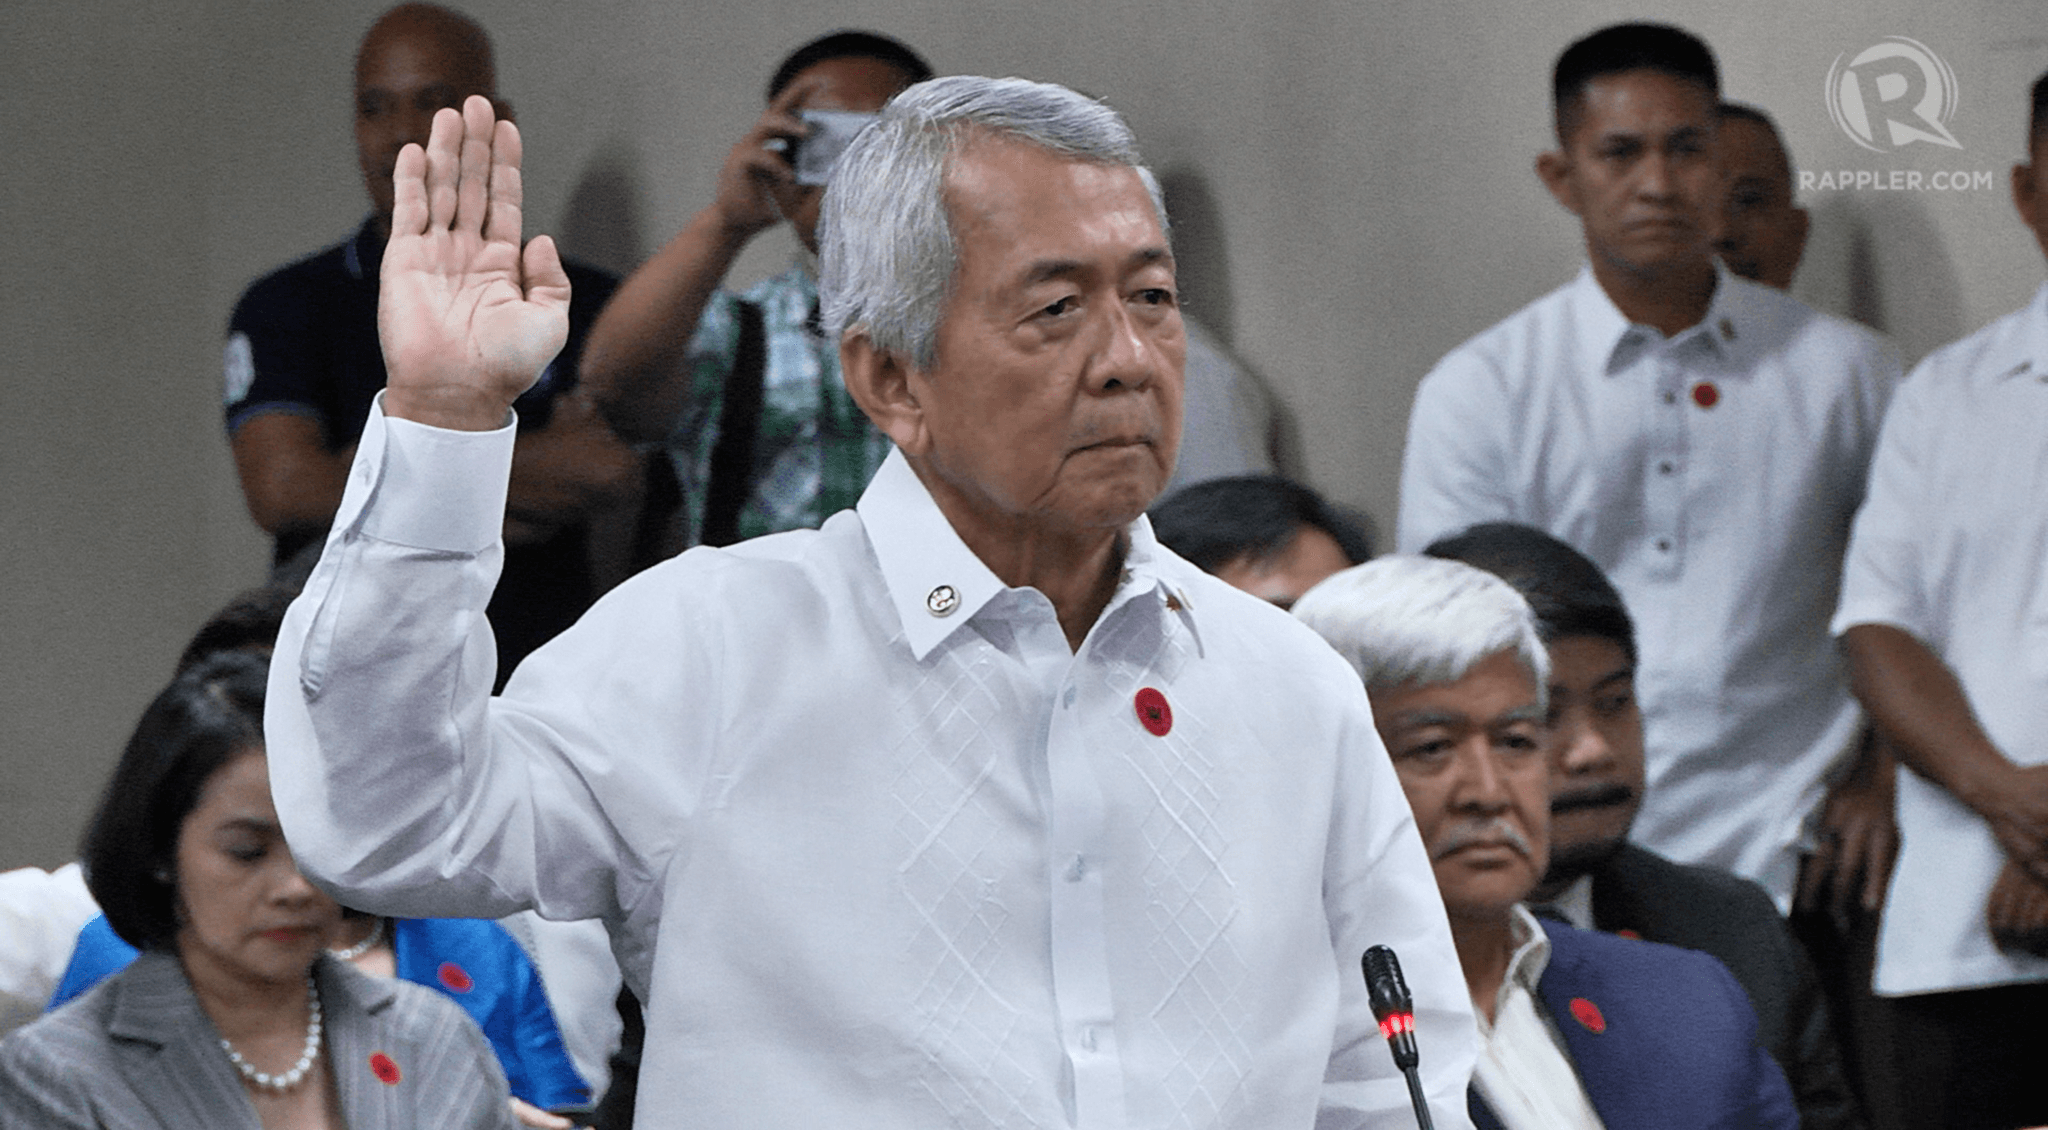 Yasay to submit ‘proof’ to CA he was never a U.S. citizen